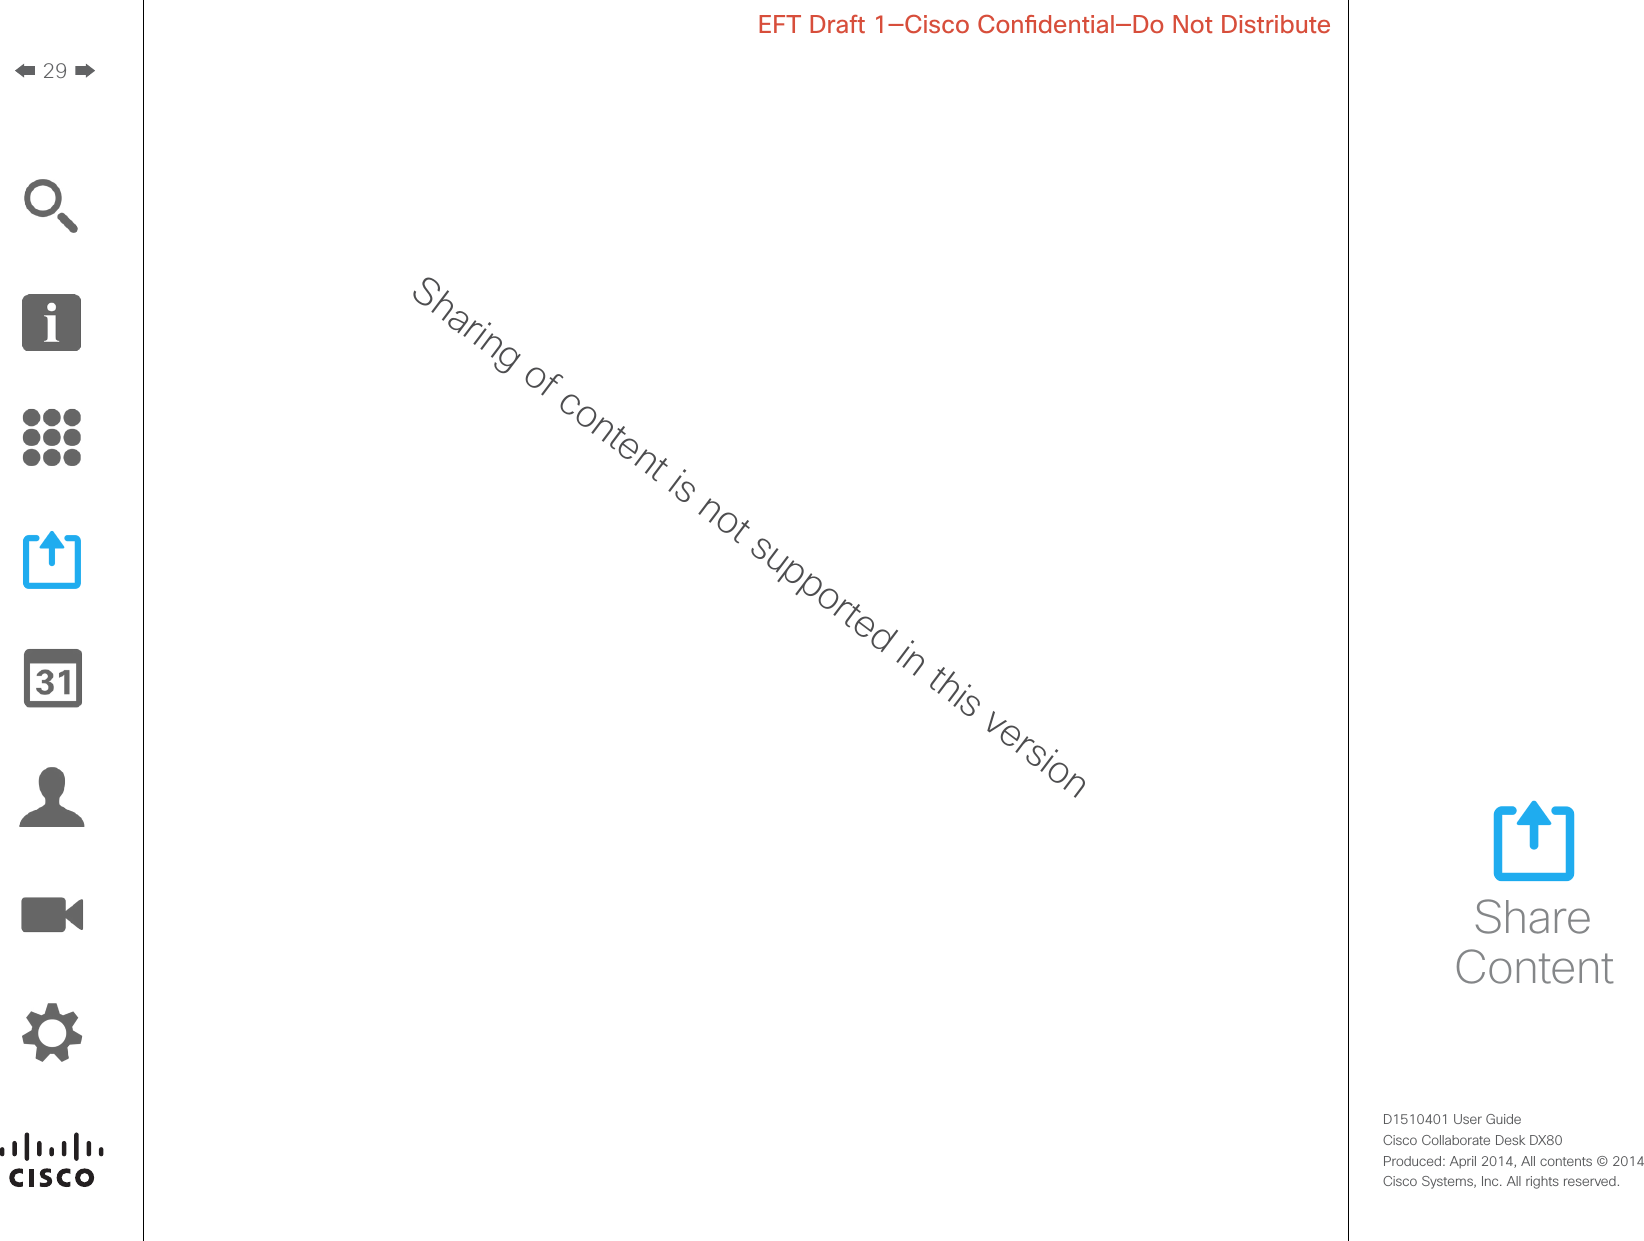 29D1510401 User Guide  Cisco Collaborate Desk DX80Produced: April 2014, All contents © 2014  Cisco Systems, Inc. All rights reserved. EFT Draft 1—Cisco Condential—Do Not DistributeShare ContentSharing of content is not supported in this version